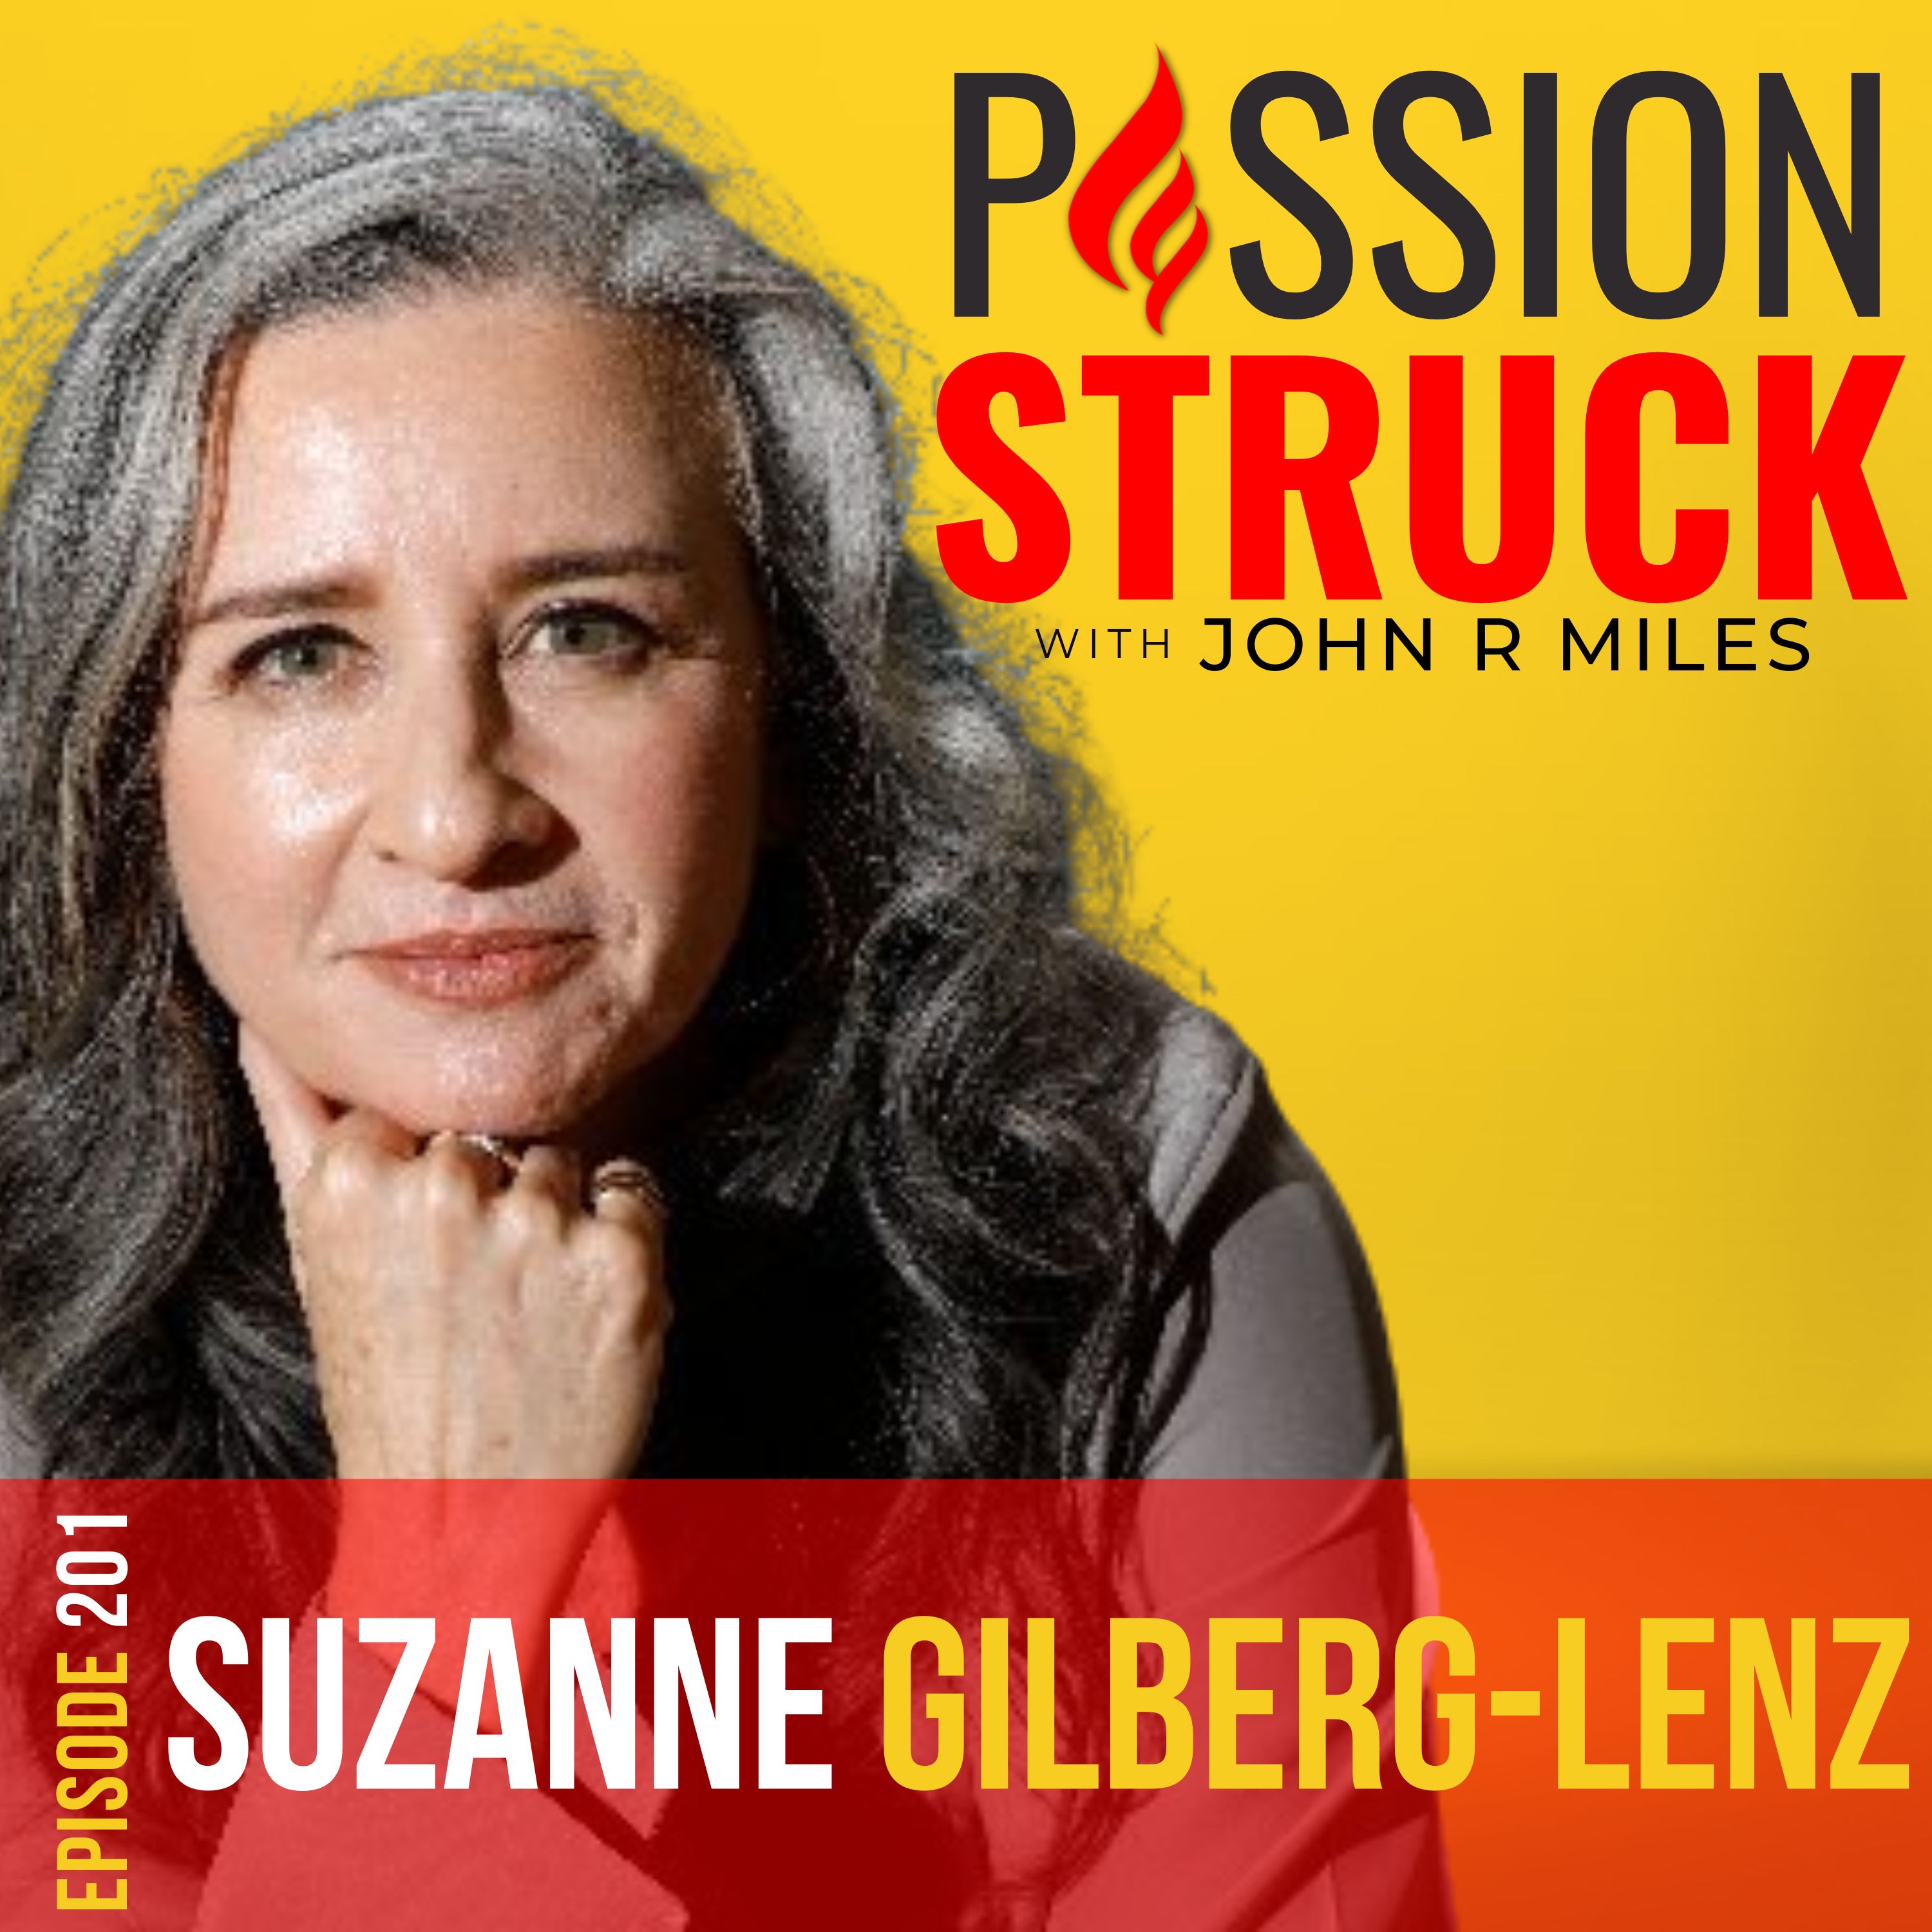 Passion Struck podcast album cover Episode 201 with Suzanne Gilberg-Lenz on demystifying menopause